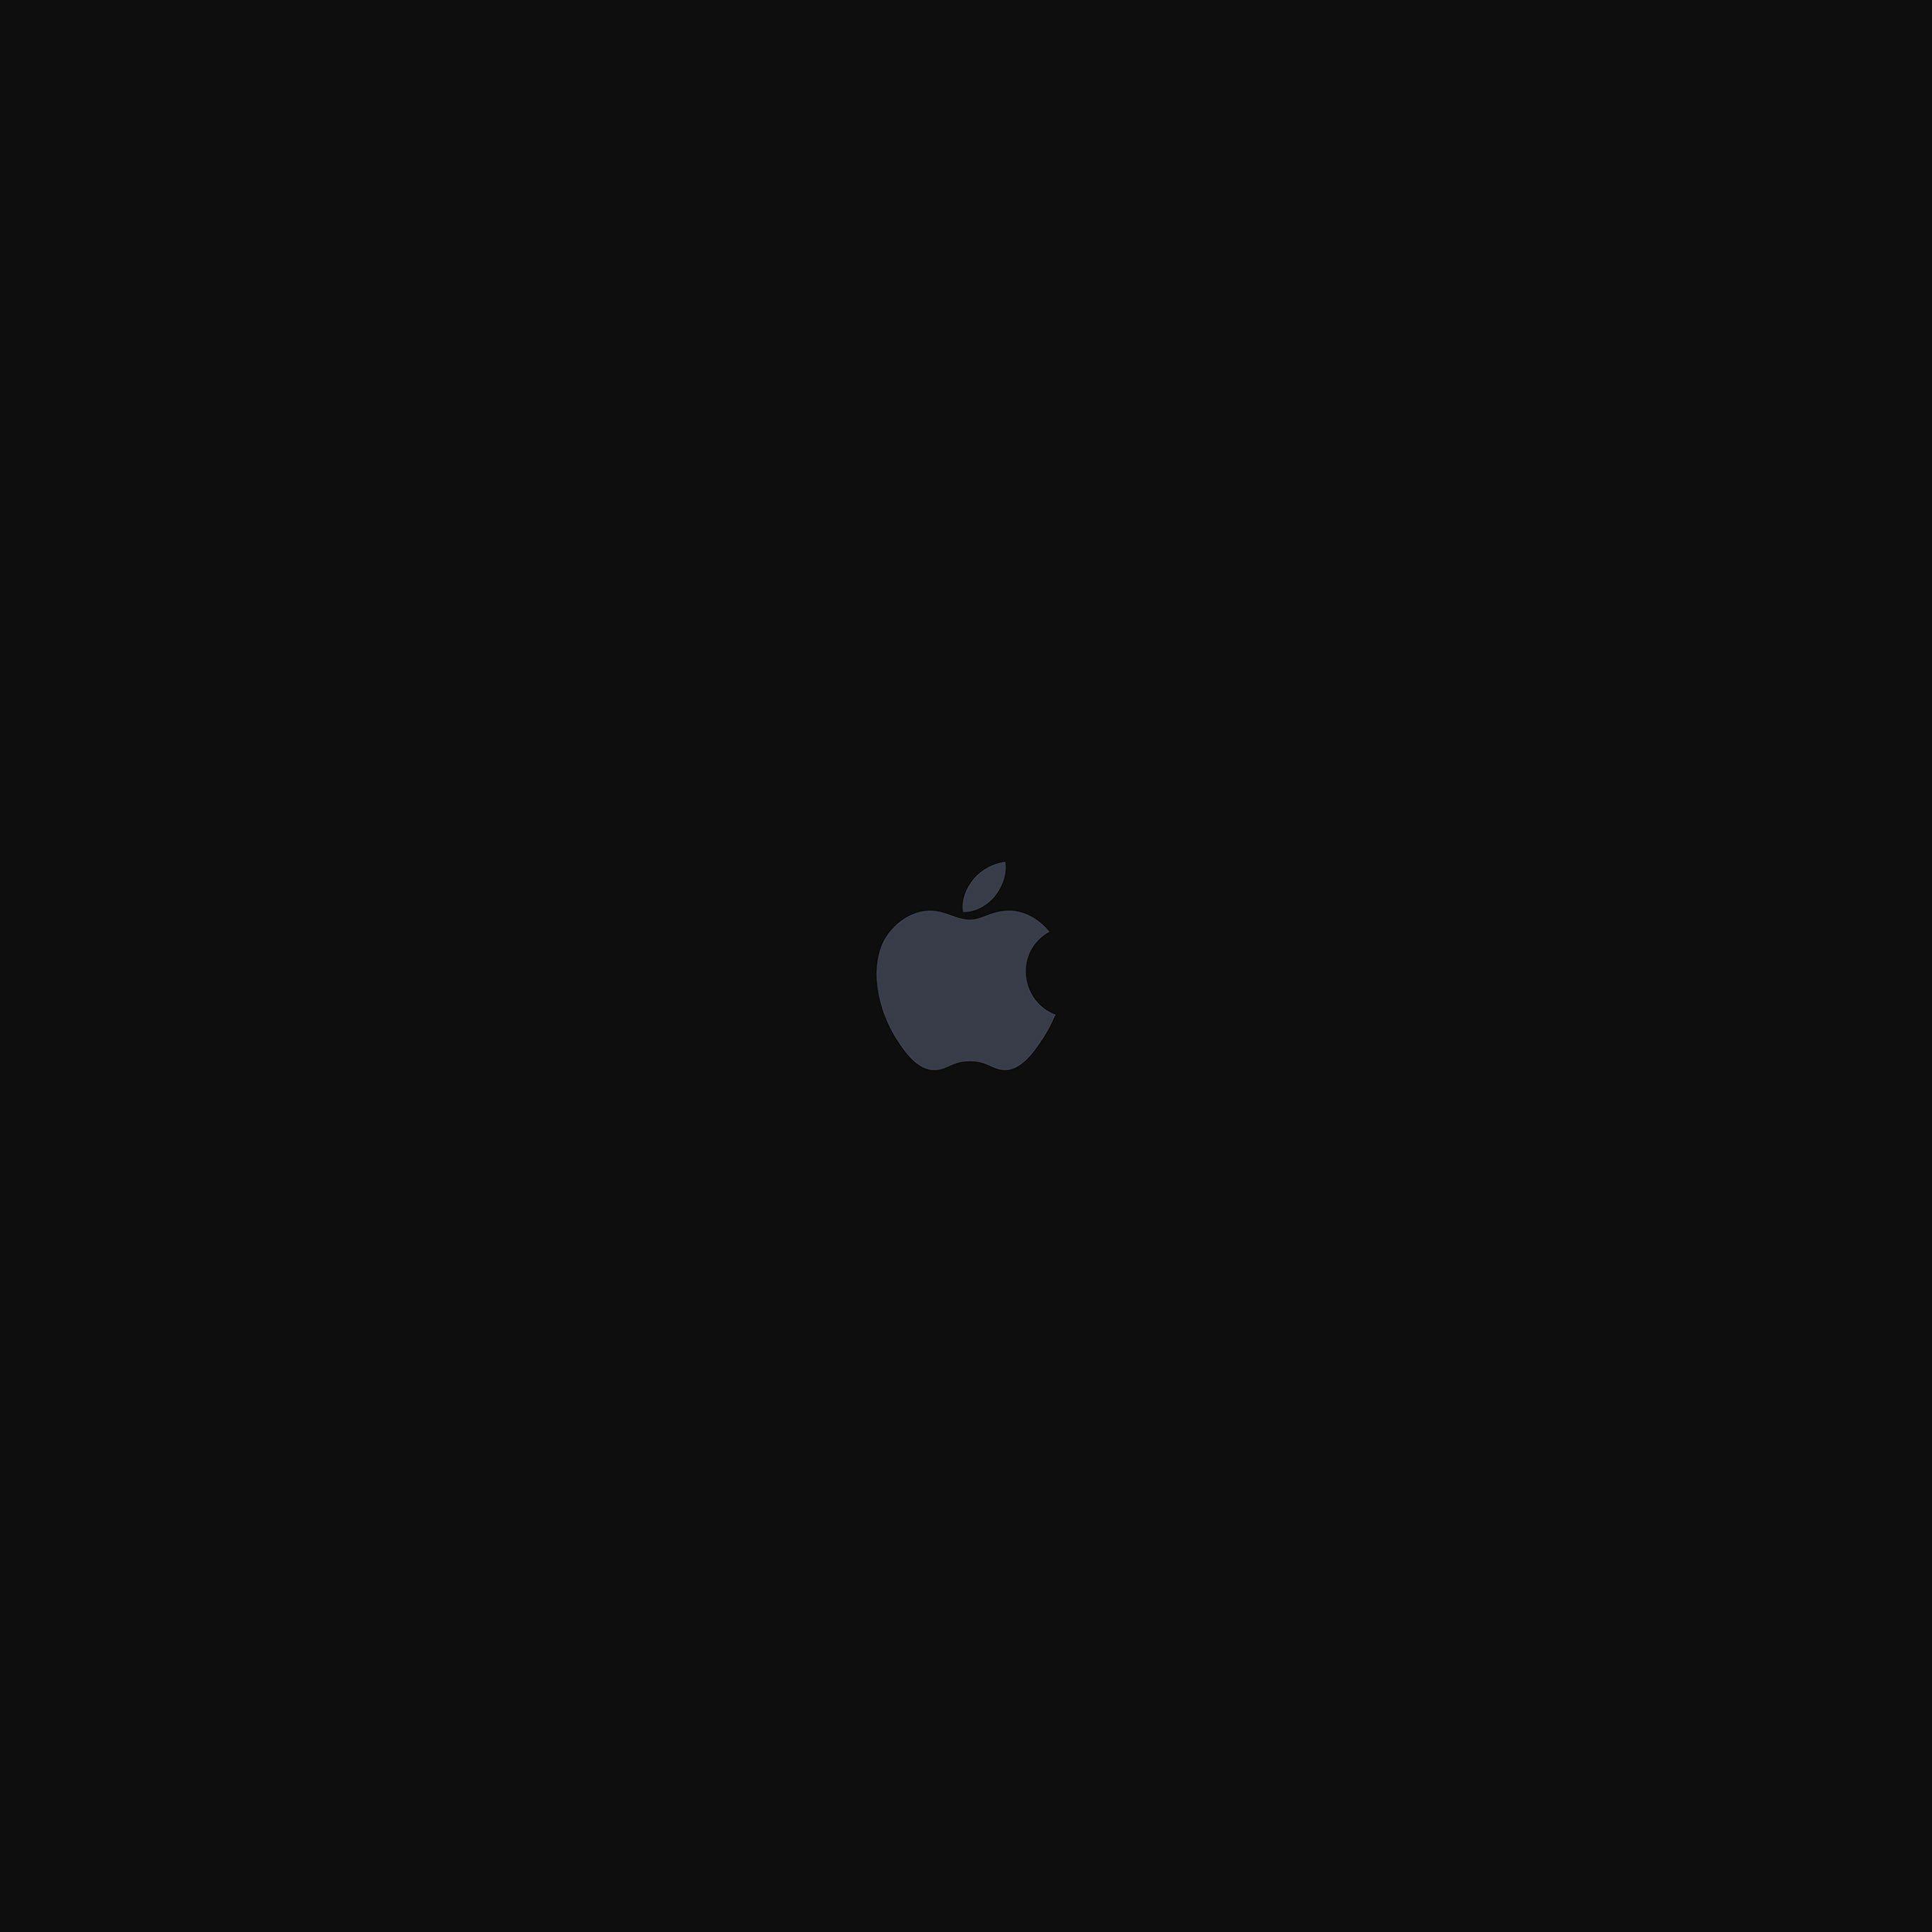 Black Apple Wallpapers - Top Free Black Apple Backgrounds - WallpaperAccess